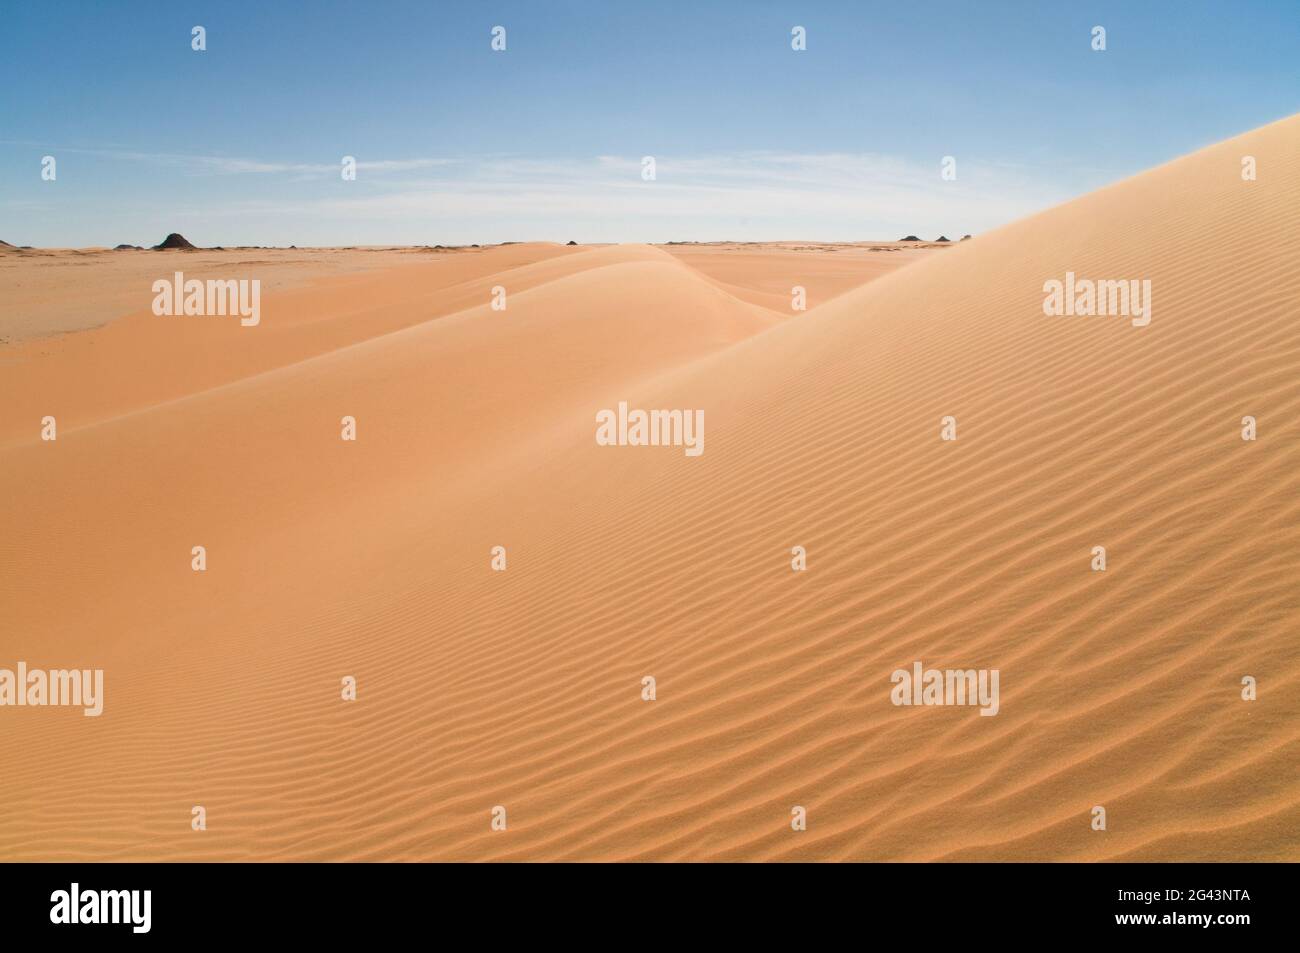 Wind ripples on a large whaleback sand dune on the edge of the Great Sand Sea, in the Western Desert region of the Sahara Desert, Egypt. Stock Photo